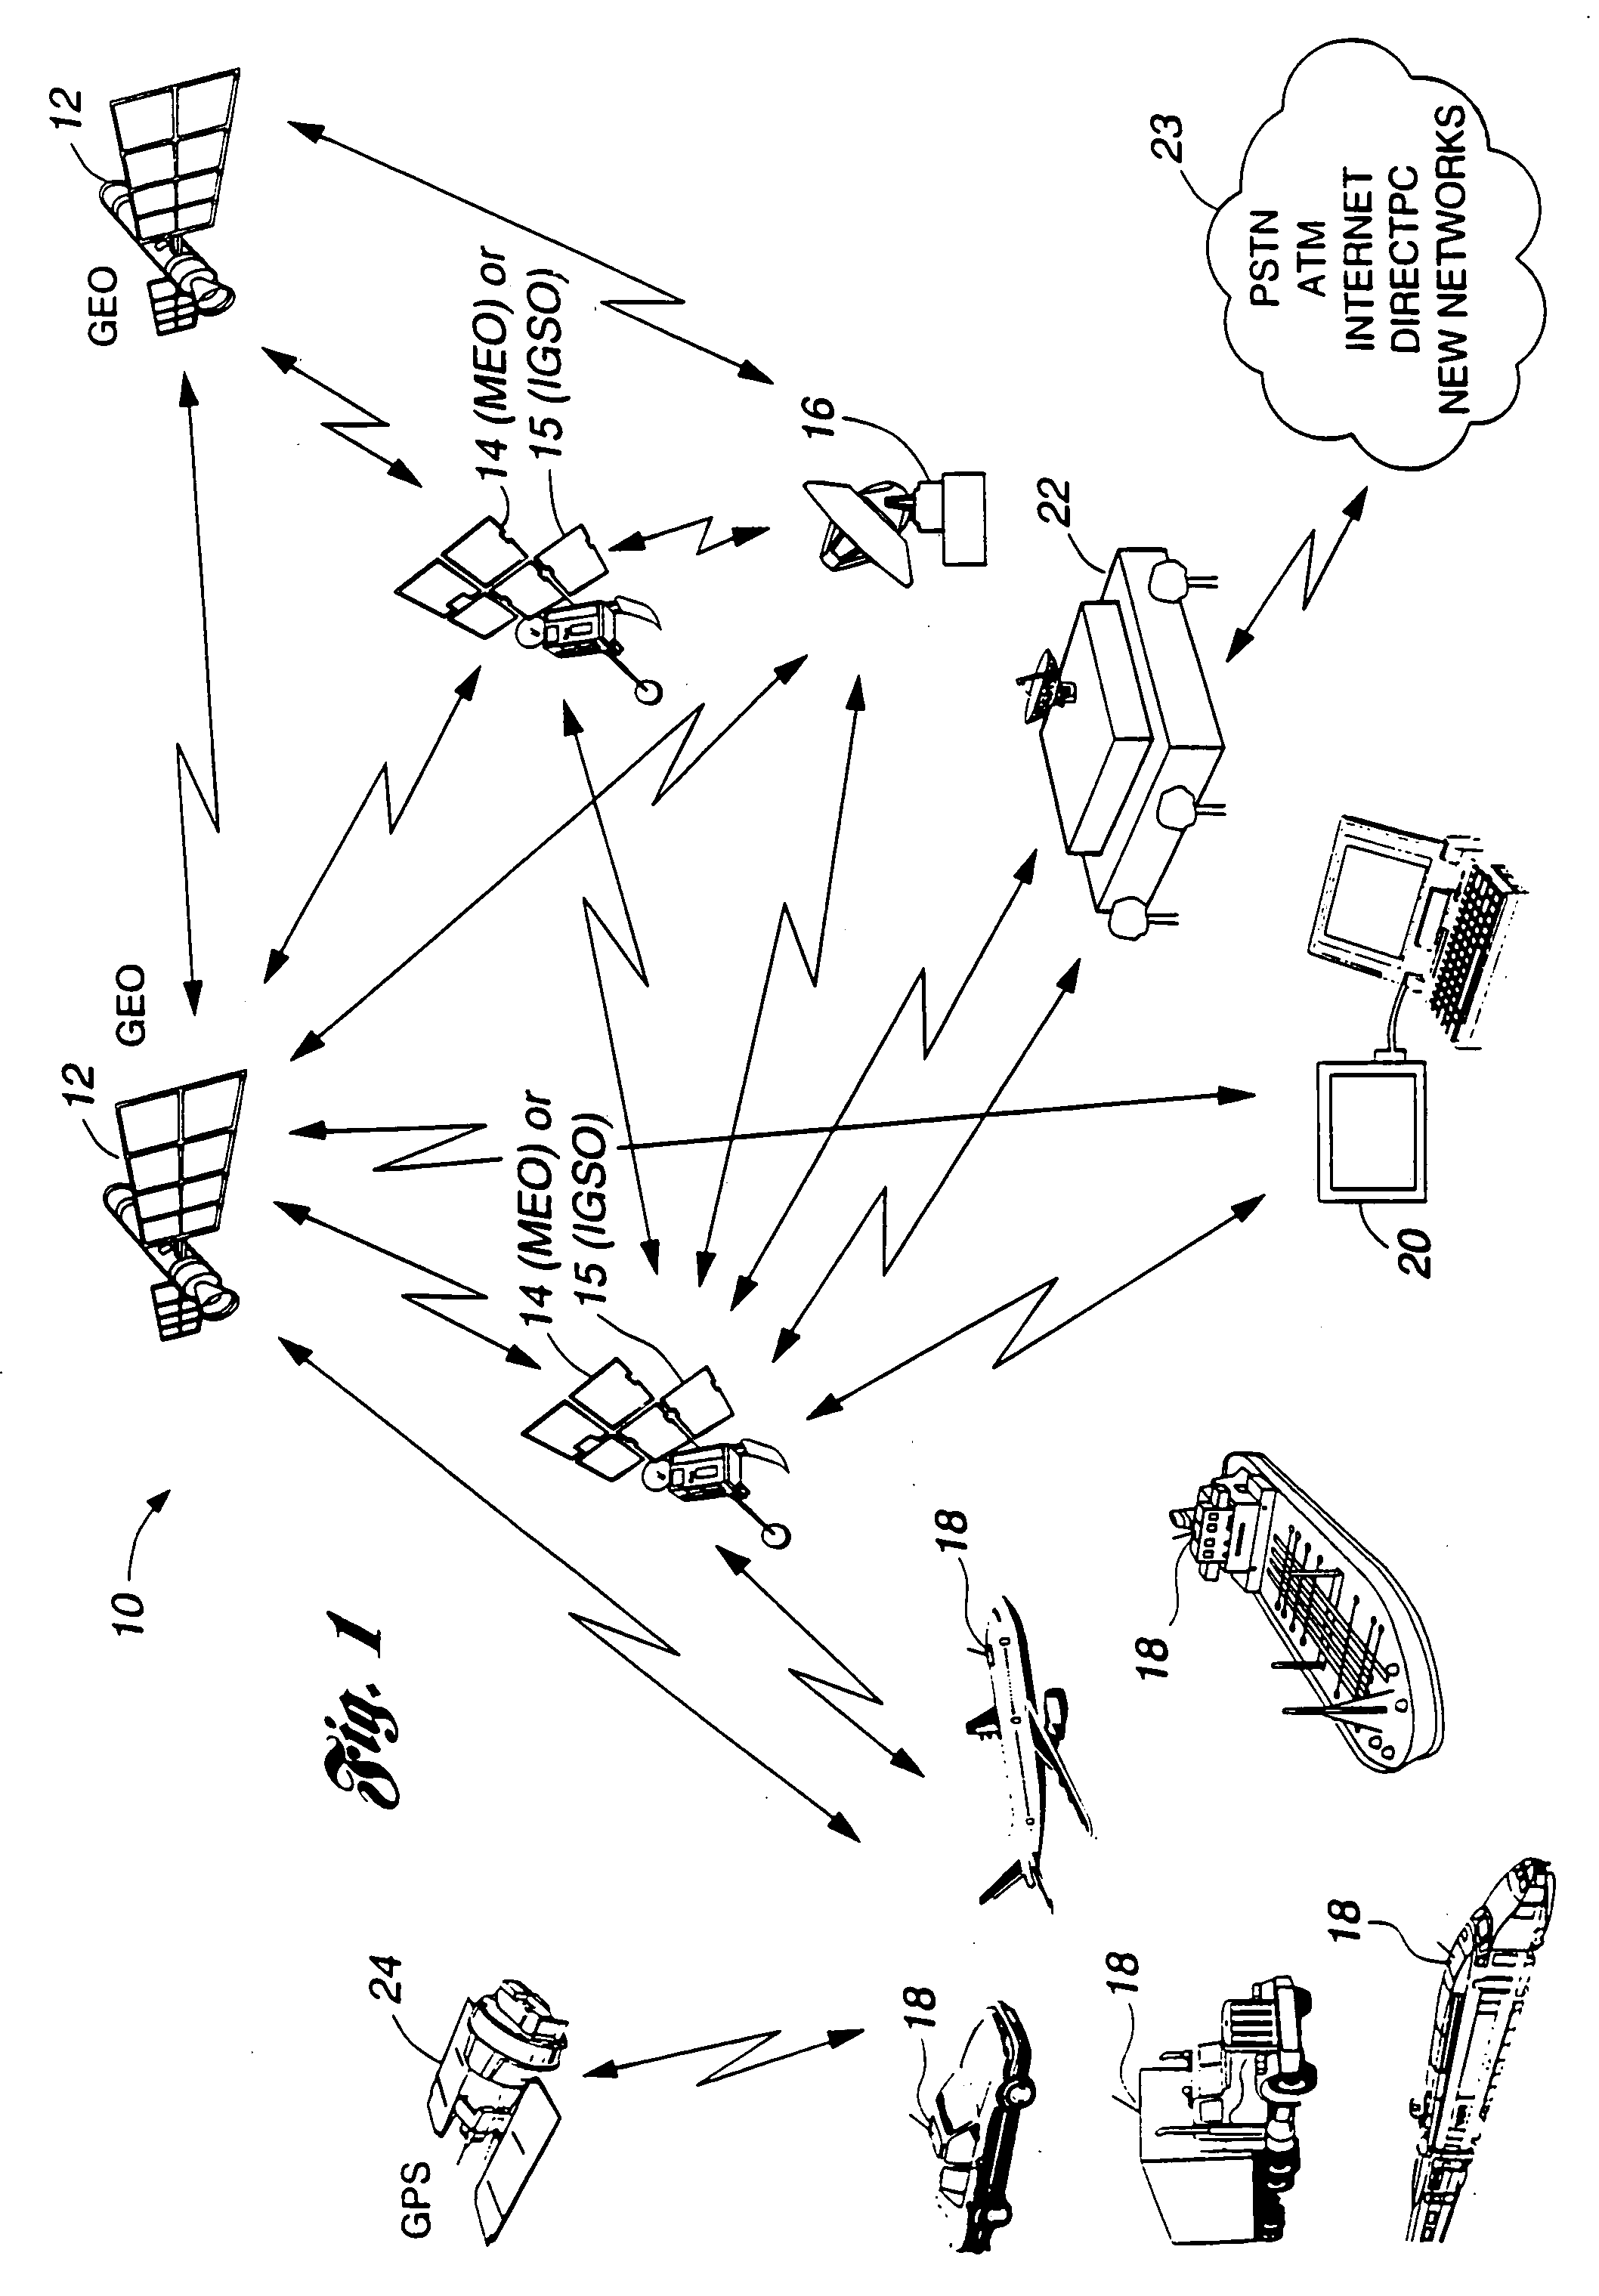 Communications system using a satellite-based network with a plurality of spot beams providing ubiquitous coverage from two different satellites